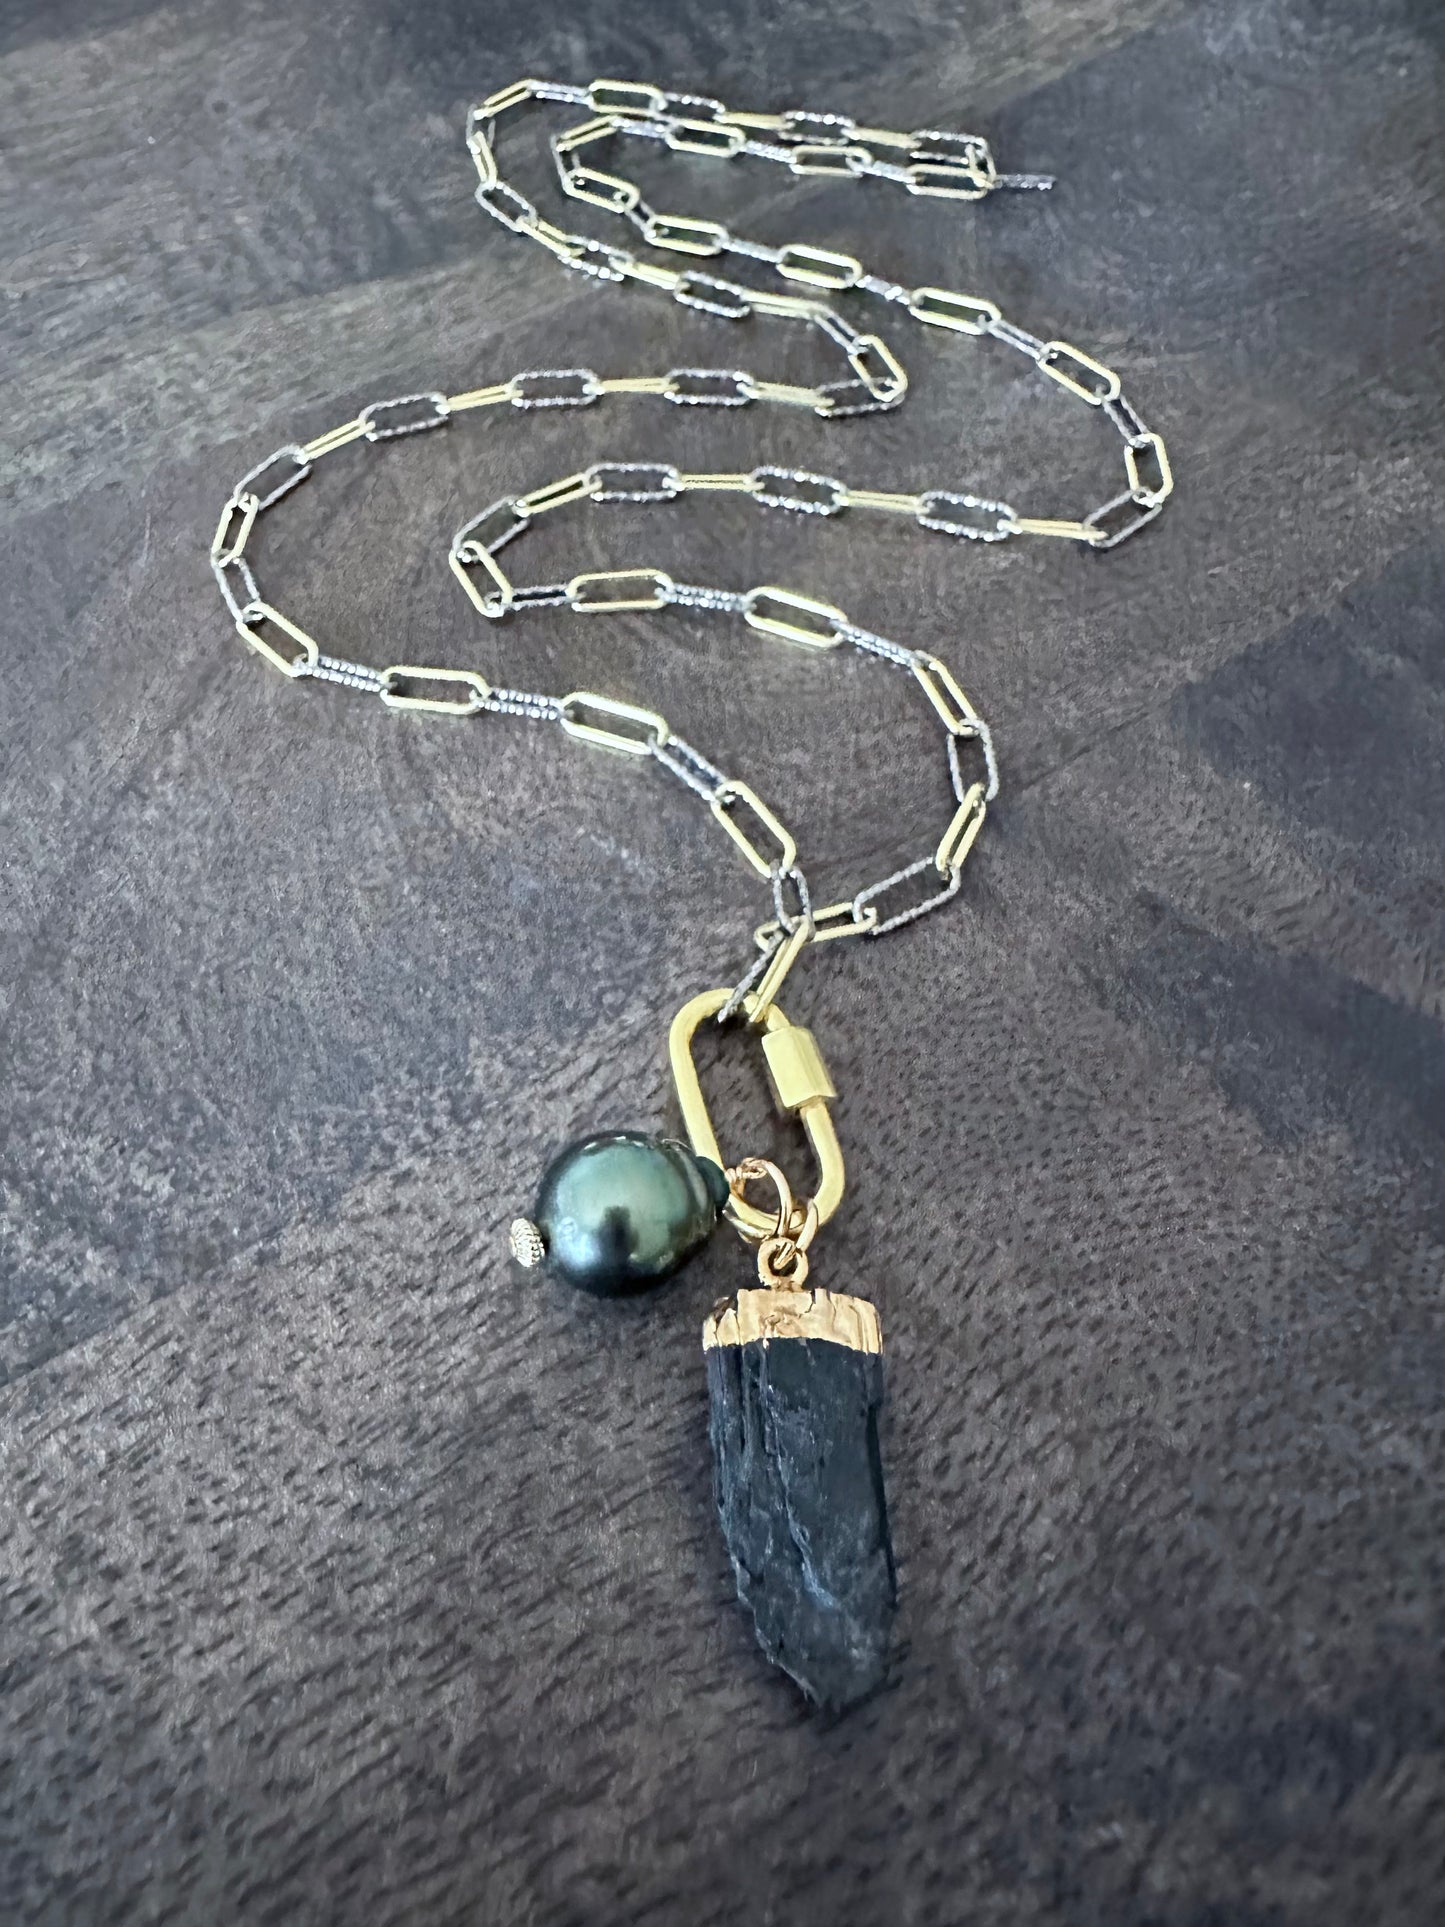 a long necklace wth mixed metal chain with a gold carabeaner and a large black pearl and a raw black tourmaline pendant on a wooden background